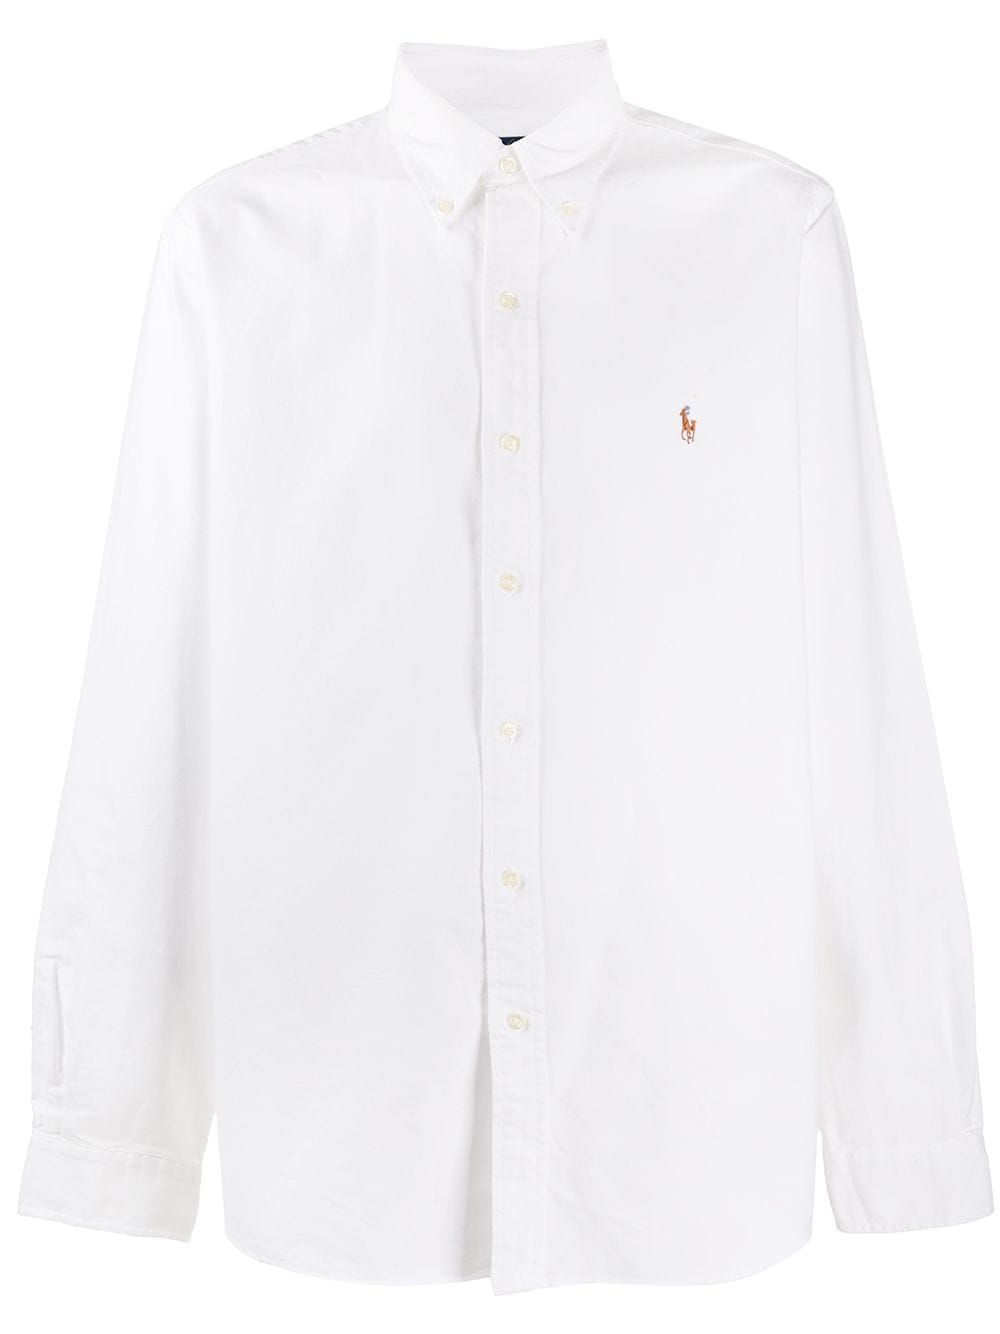 Image 1 of Polo Ralph Lauren embroidered logo cotton shirt